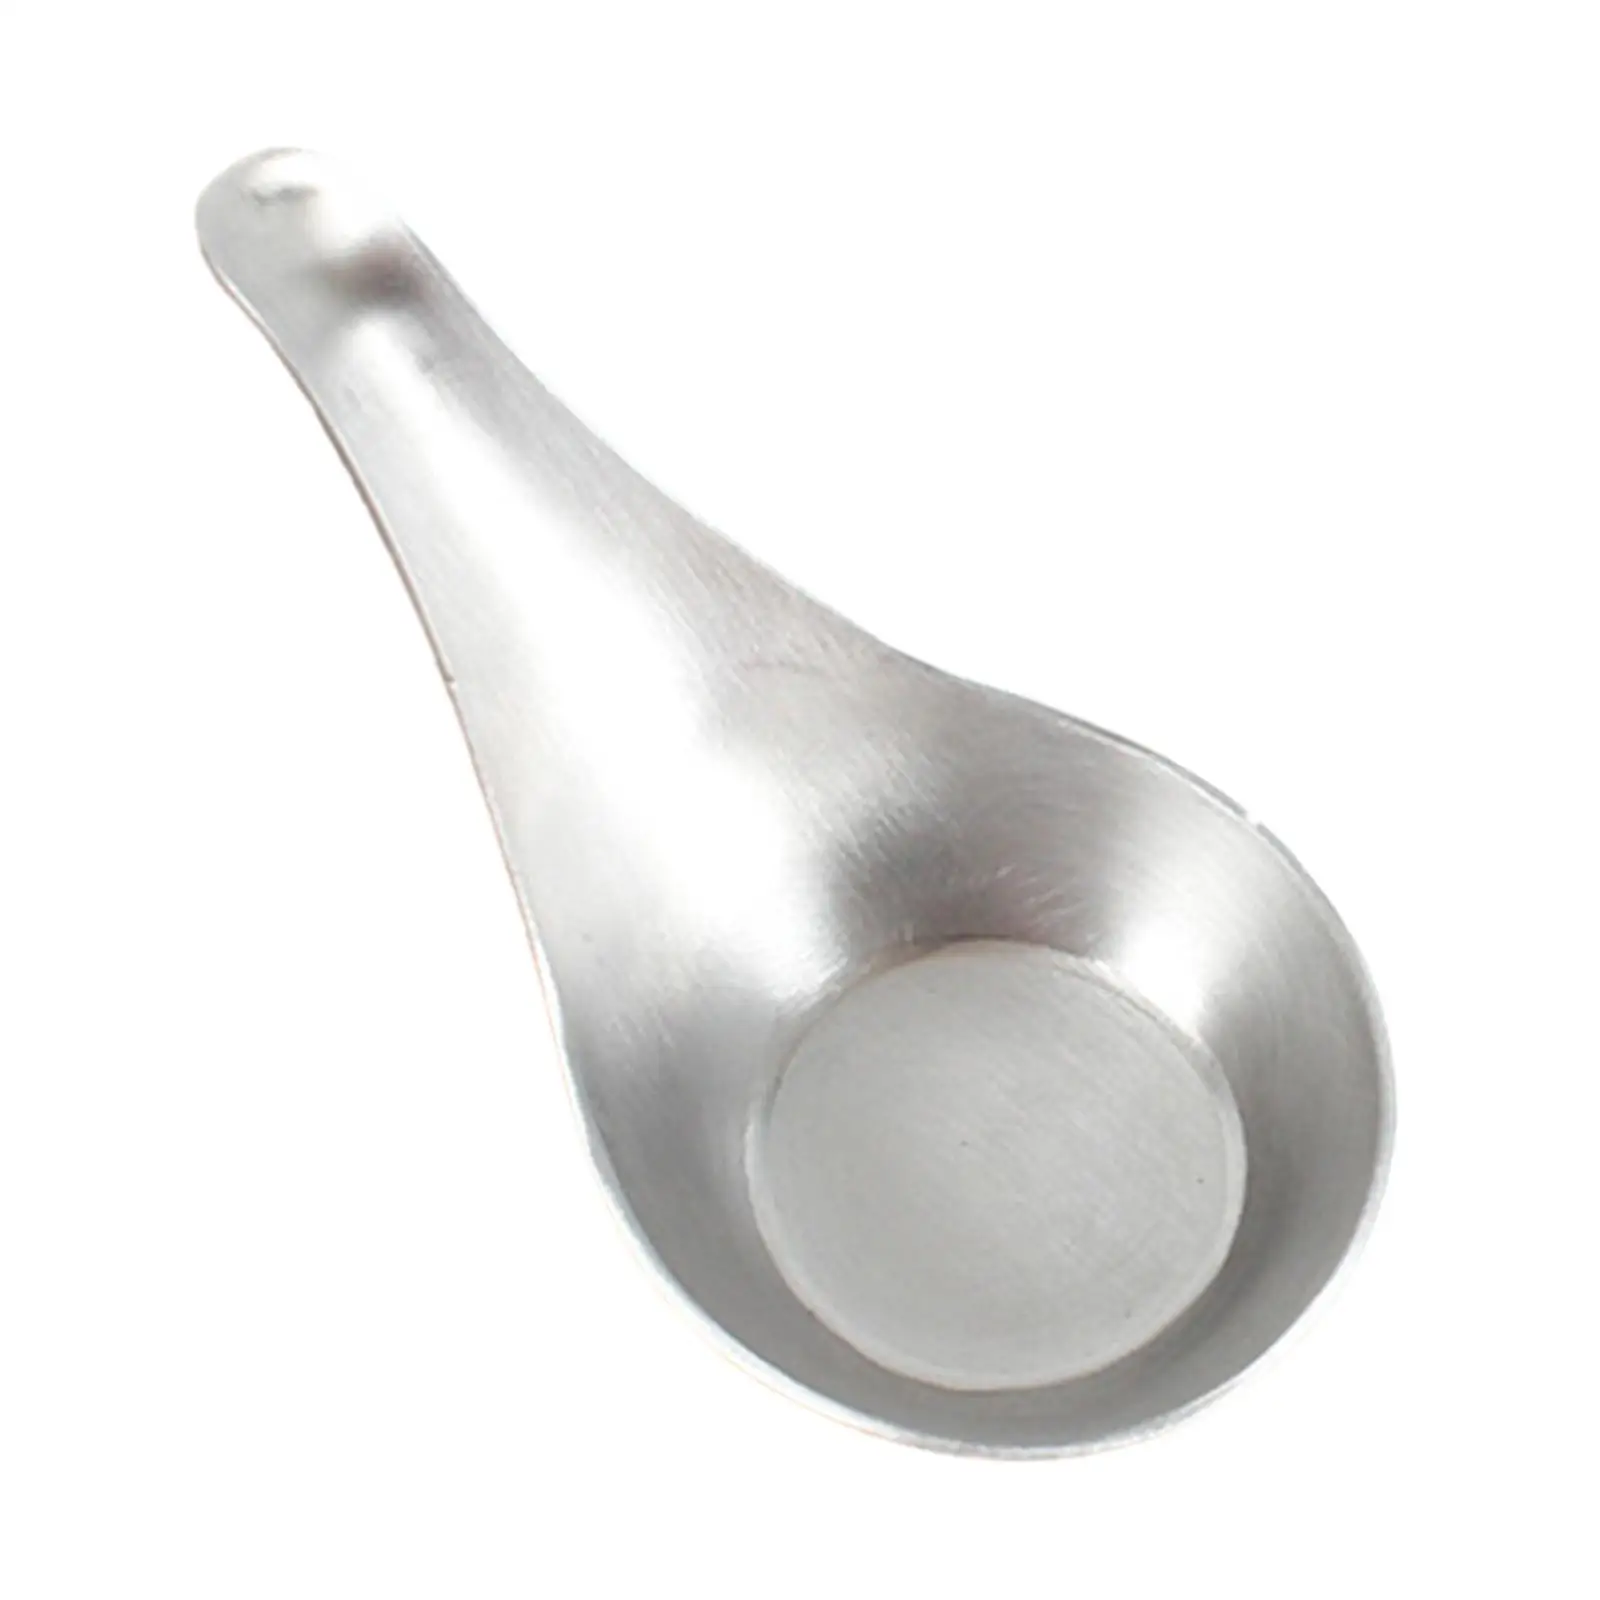 Stainless Steel Short Handle Spoon for Condiments Dessert Coffee